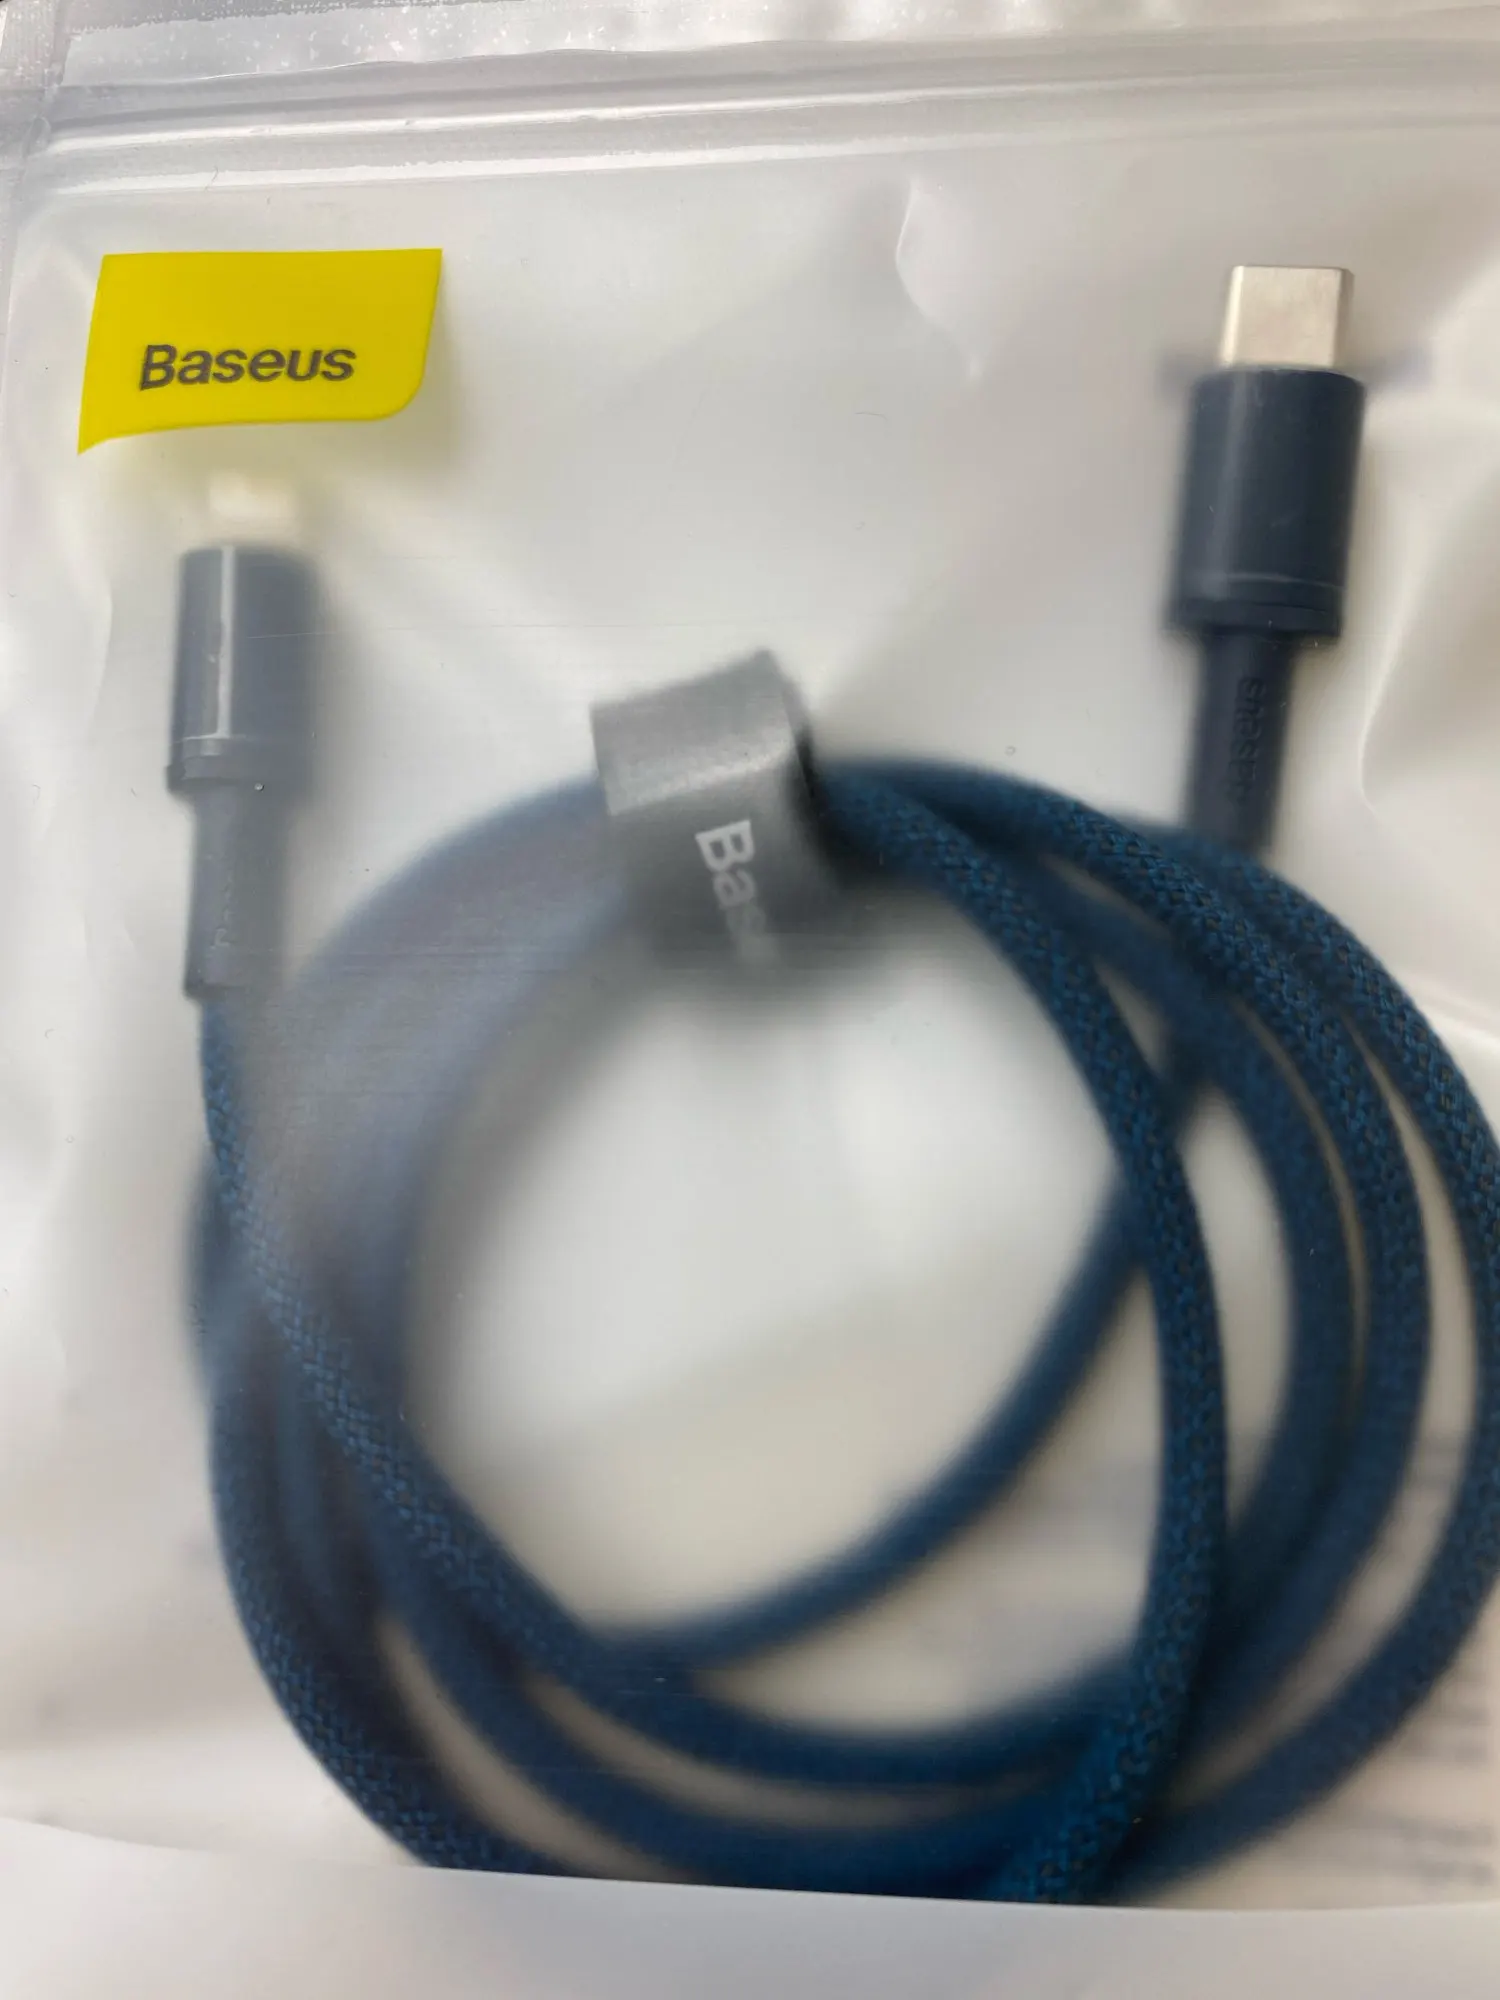 Baseus 20W USB Type C to Lighting Cable Data PD Fast Charging For iPhone 12 Mini Pro Max photo review